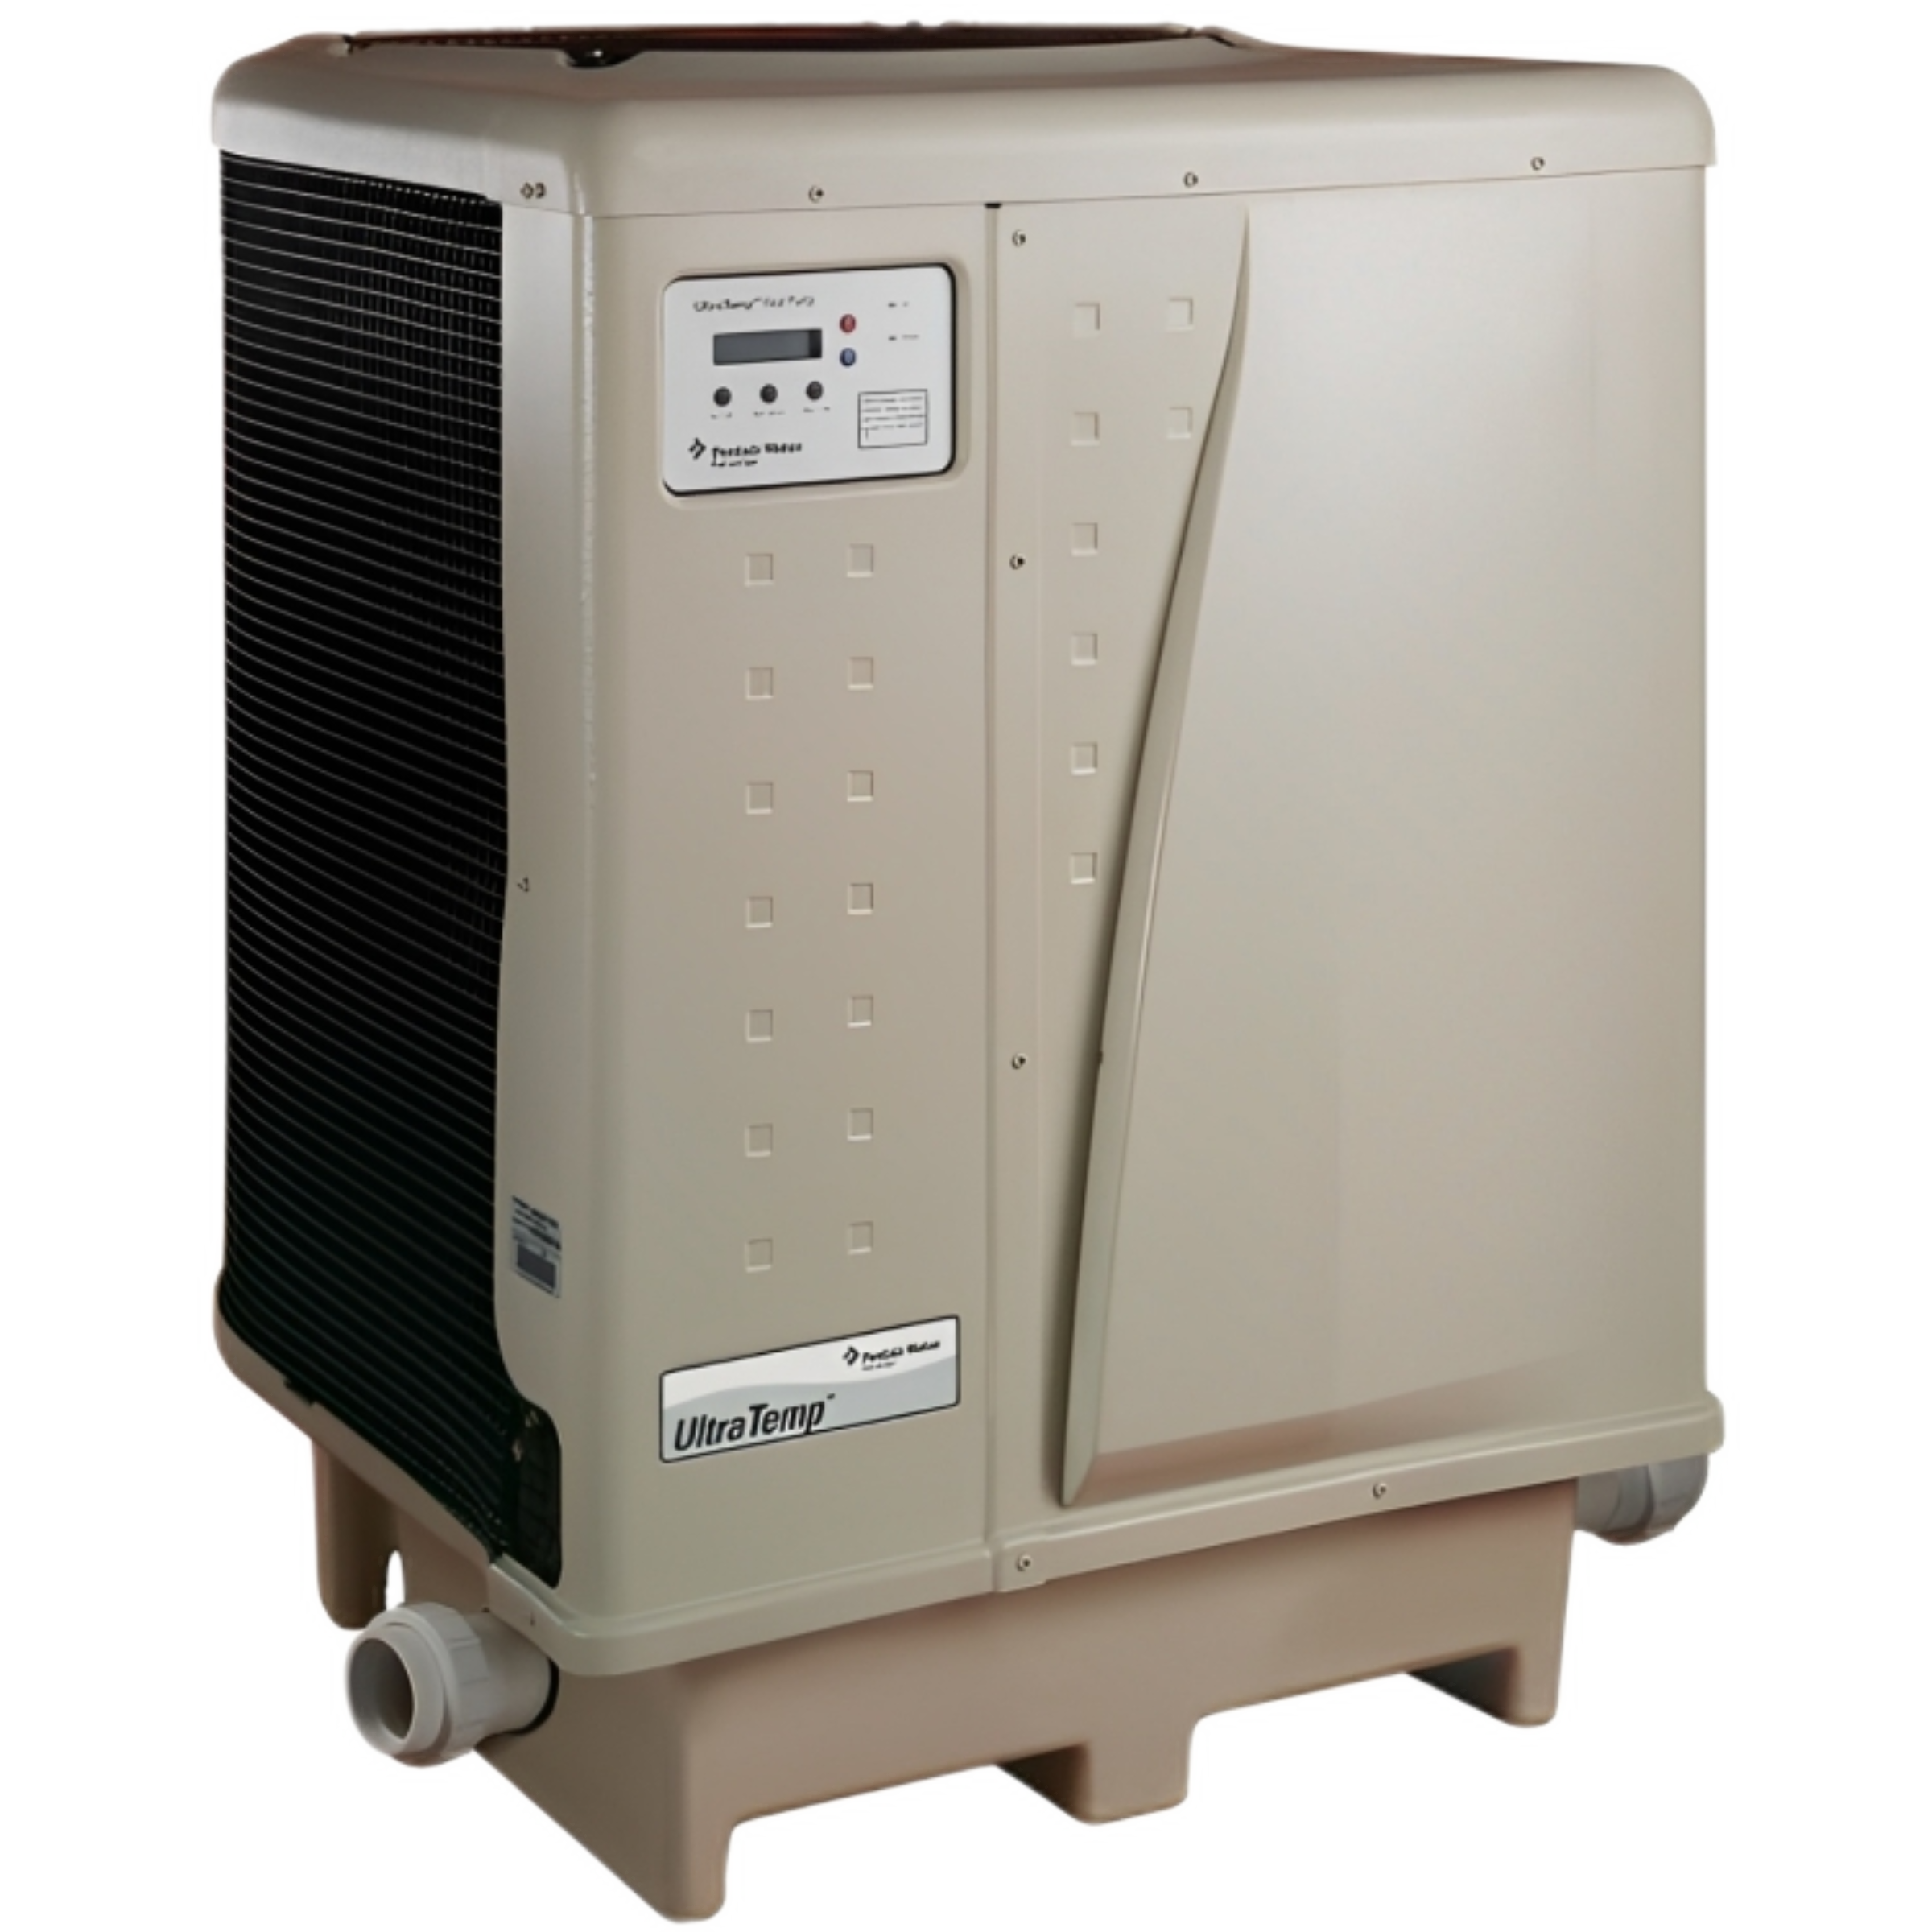 460933 PENTAIR UltraTemp High Performance Pool Heat Pump, Color: Almond, 
SIMPLY THE MOST ECONOMICAL WAY TO HEAT POOLS AND SPAS